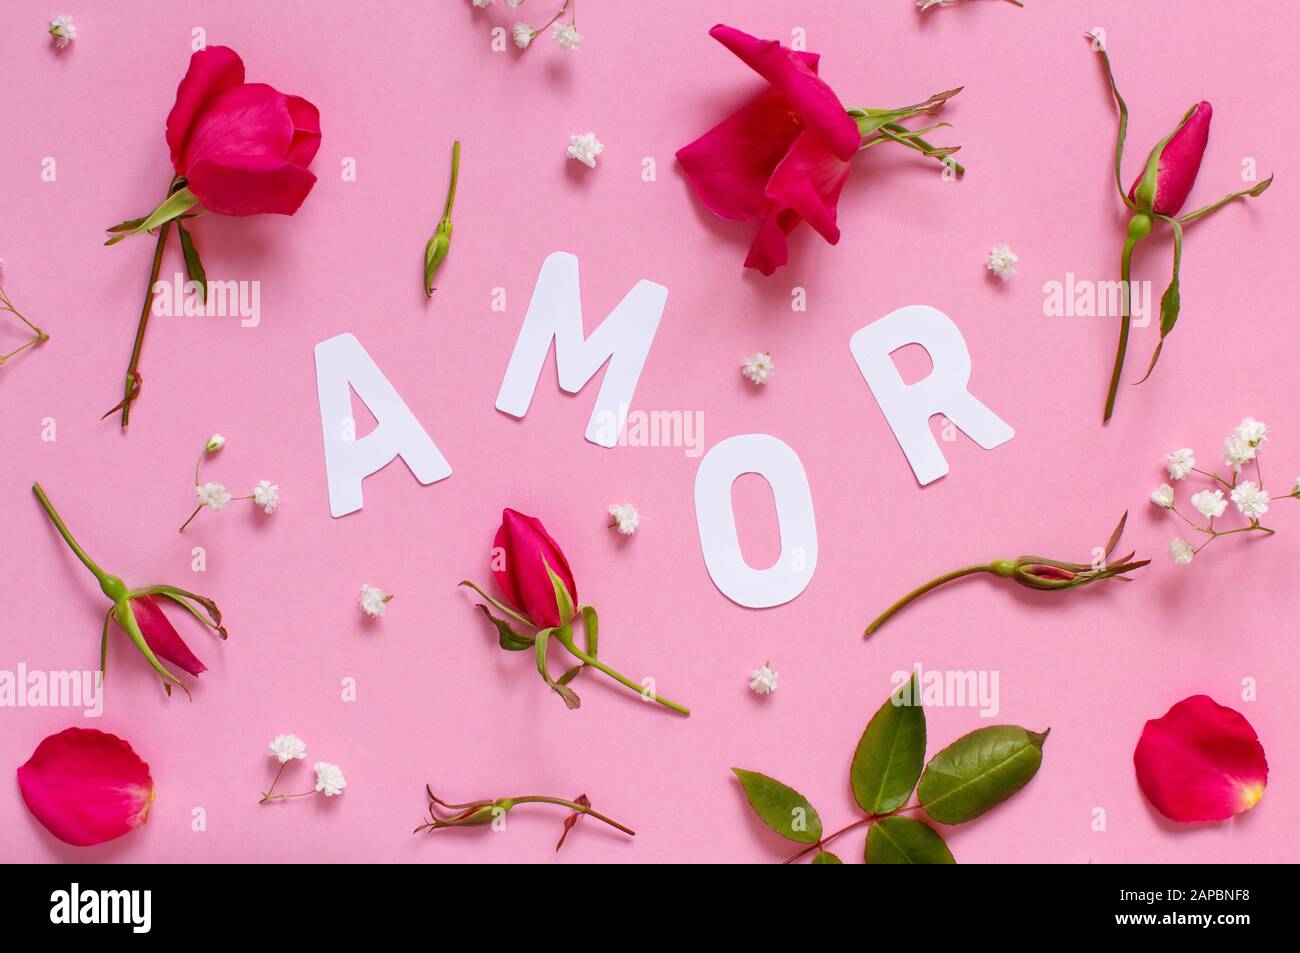 Red flowers and text AMOR on a light pink background top view Stock Photo